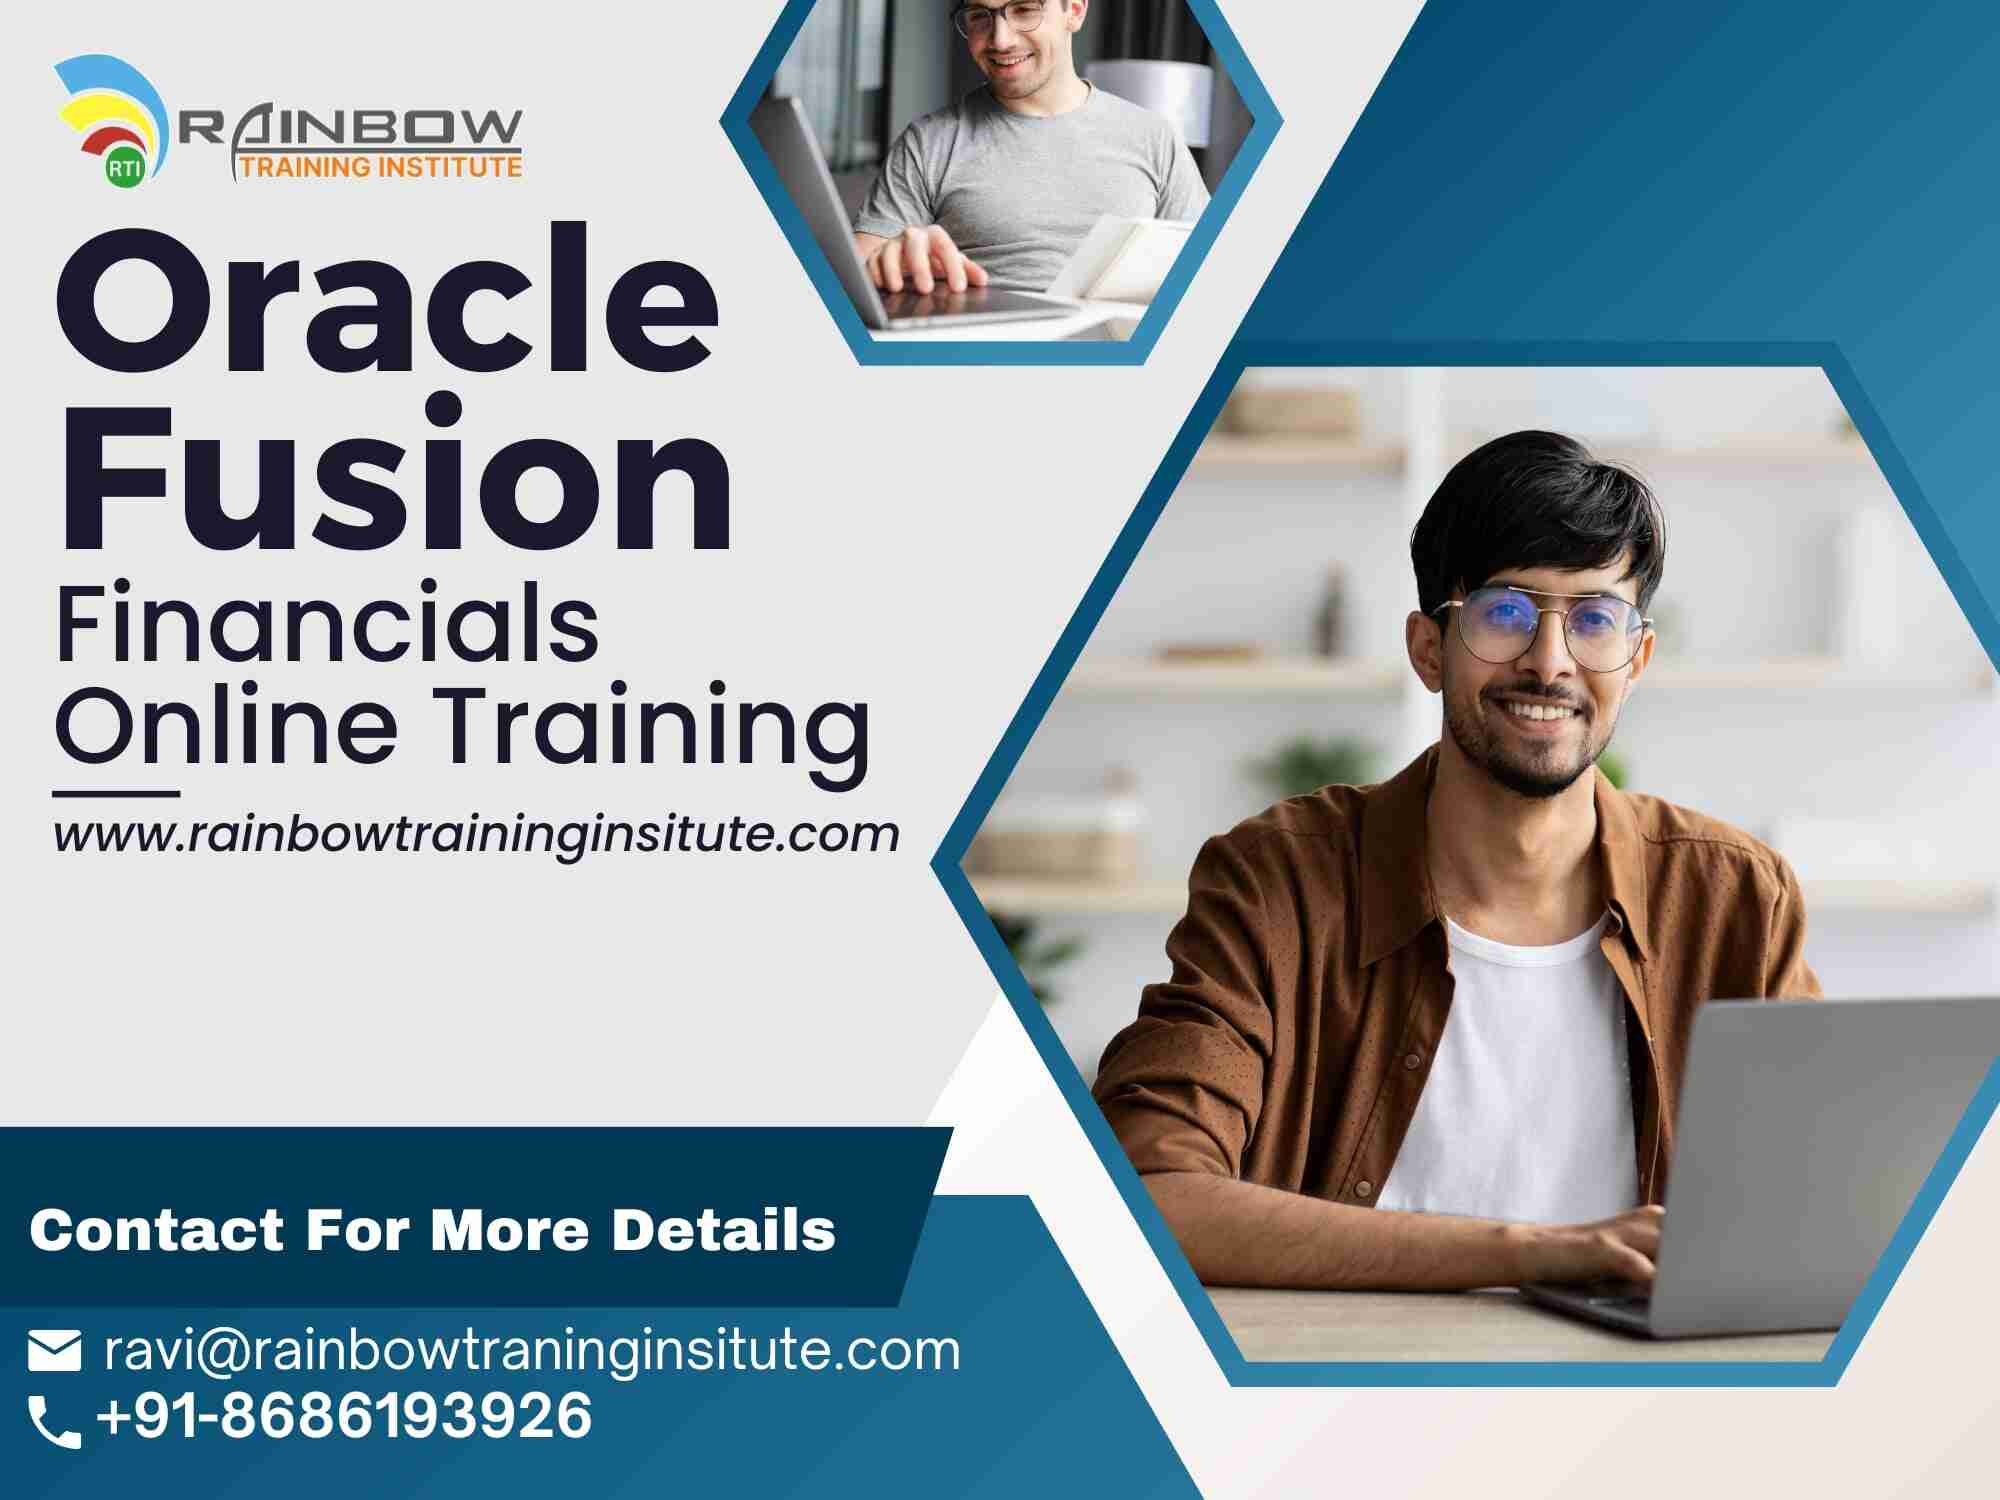  Oracle Fusion Financials Online Training | Oracle Fusion Financials Training